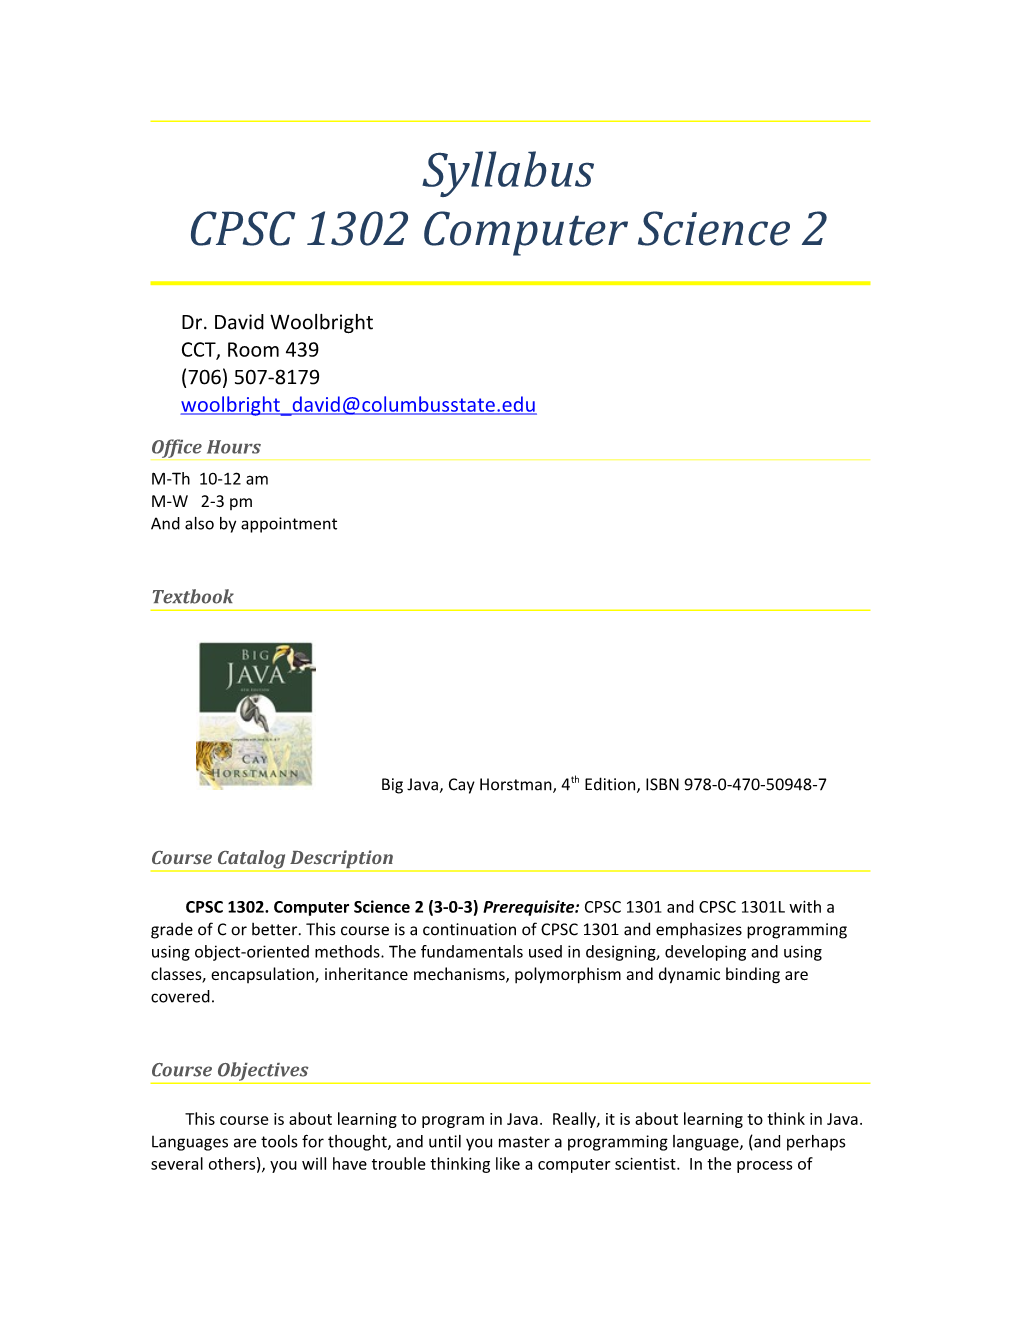 CPSC 1302: Computer Science 2